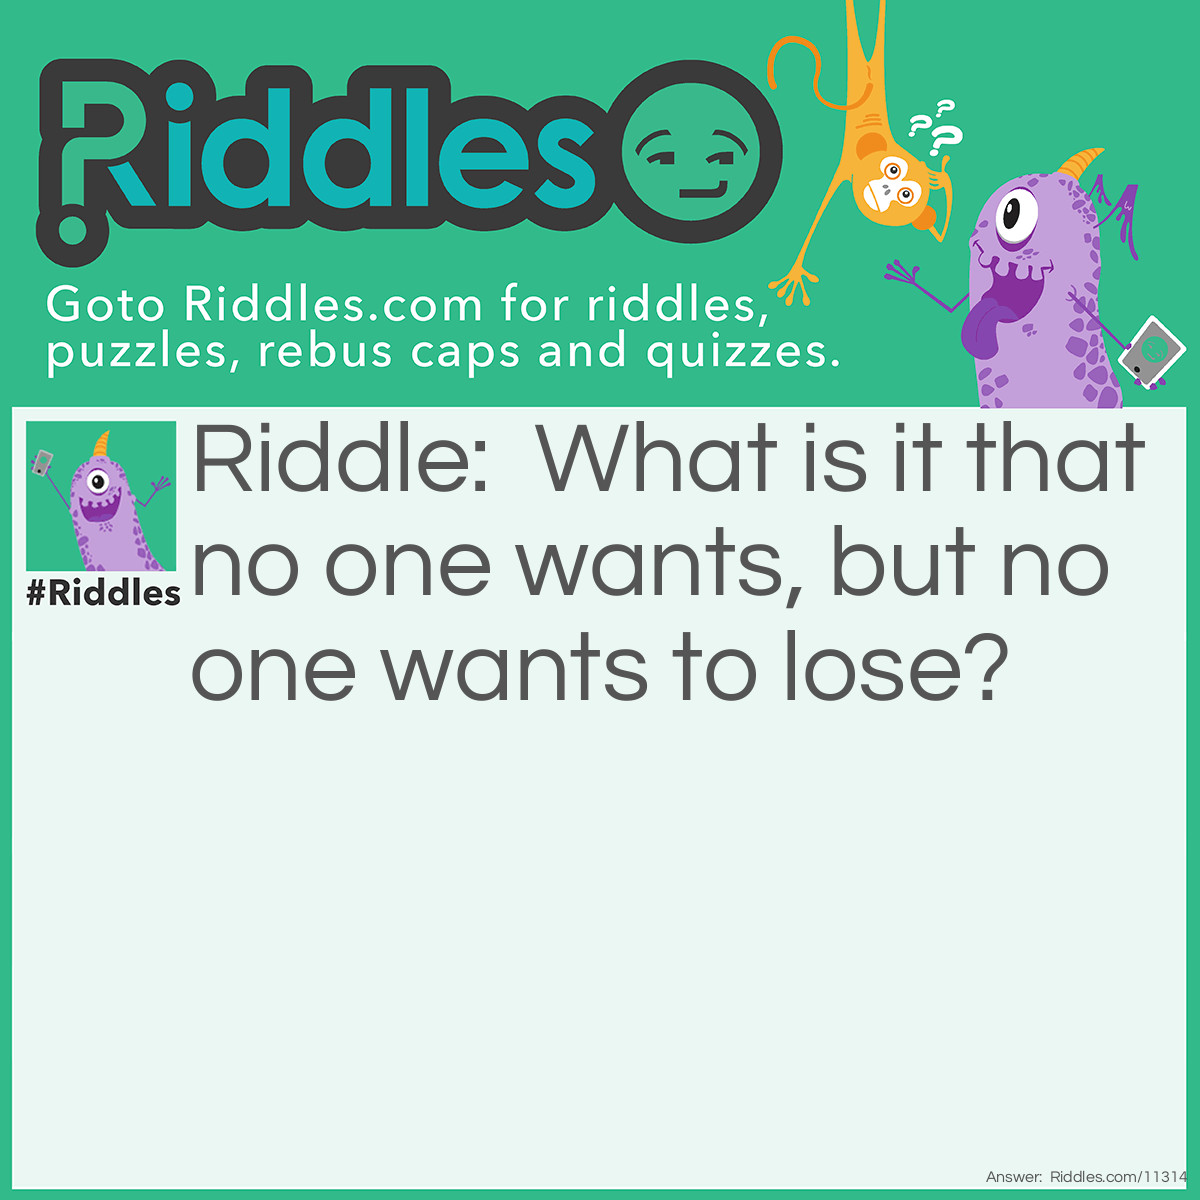 Riddle: What is it that no one wants, but no one wants to lose? Answer: A lawsuit.